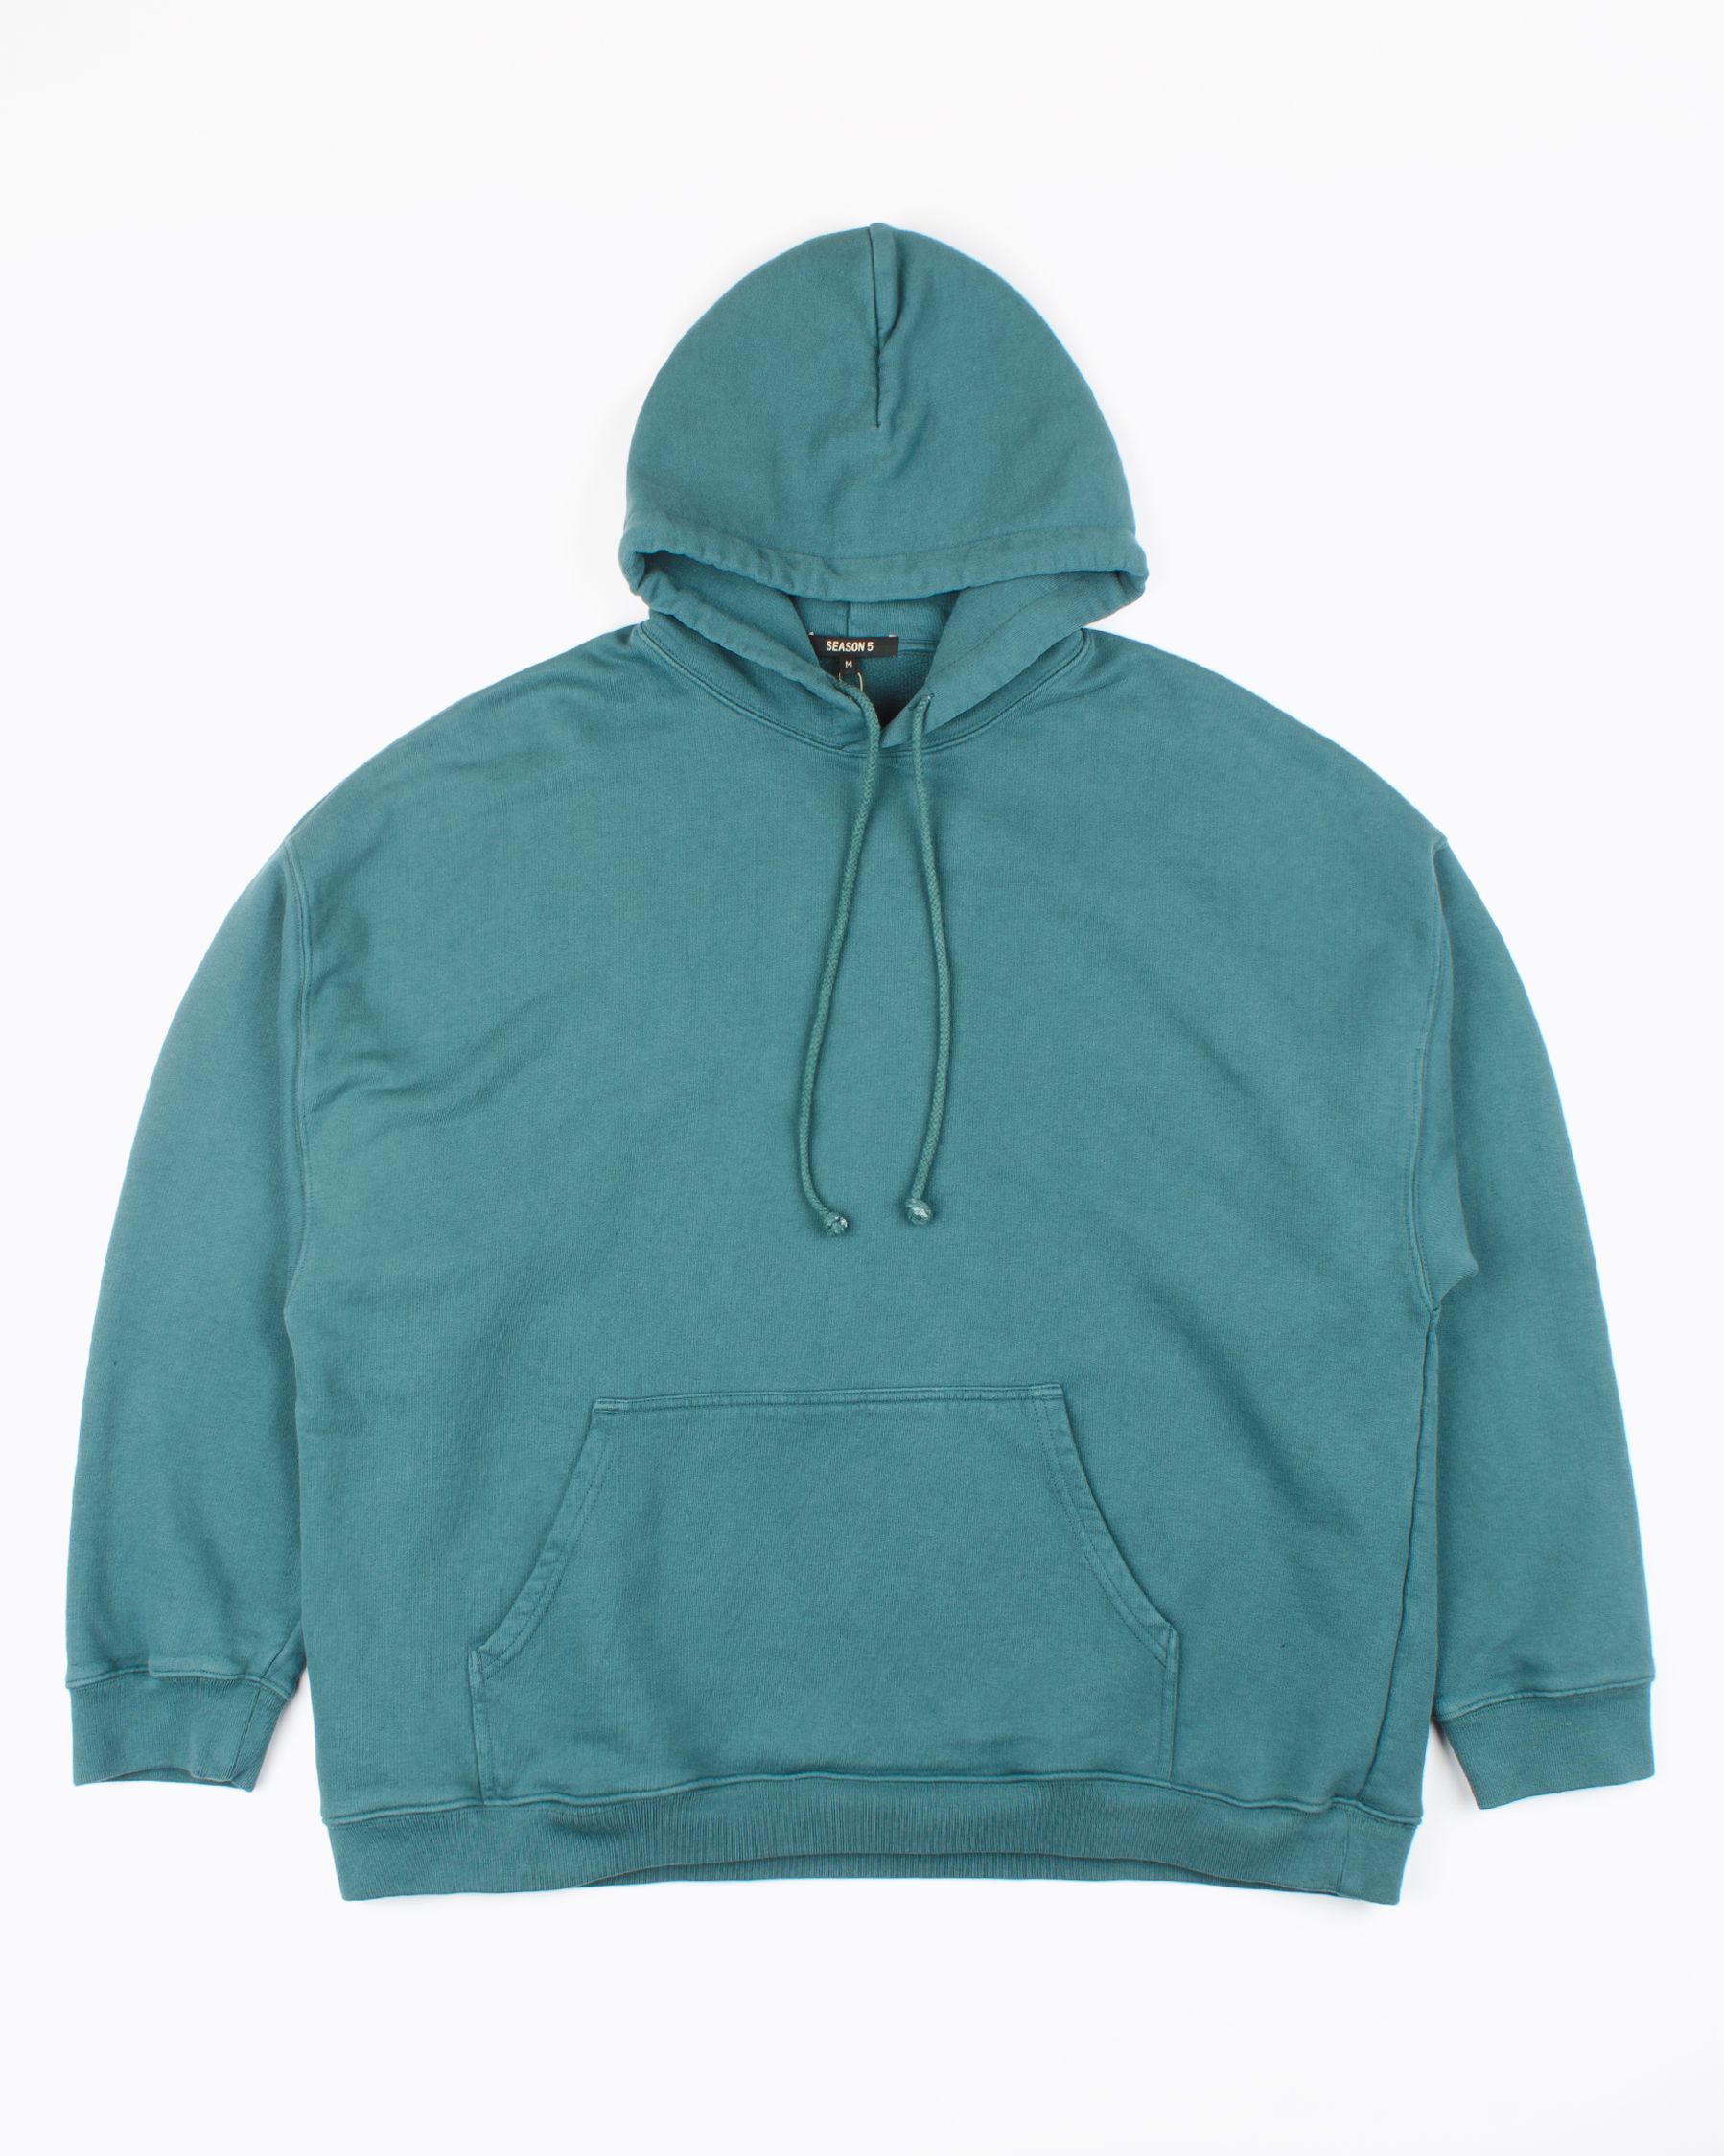 Kanye West Single Layer Teal Hoodie Size US XL / EU 56 / 4 - 1 Preview